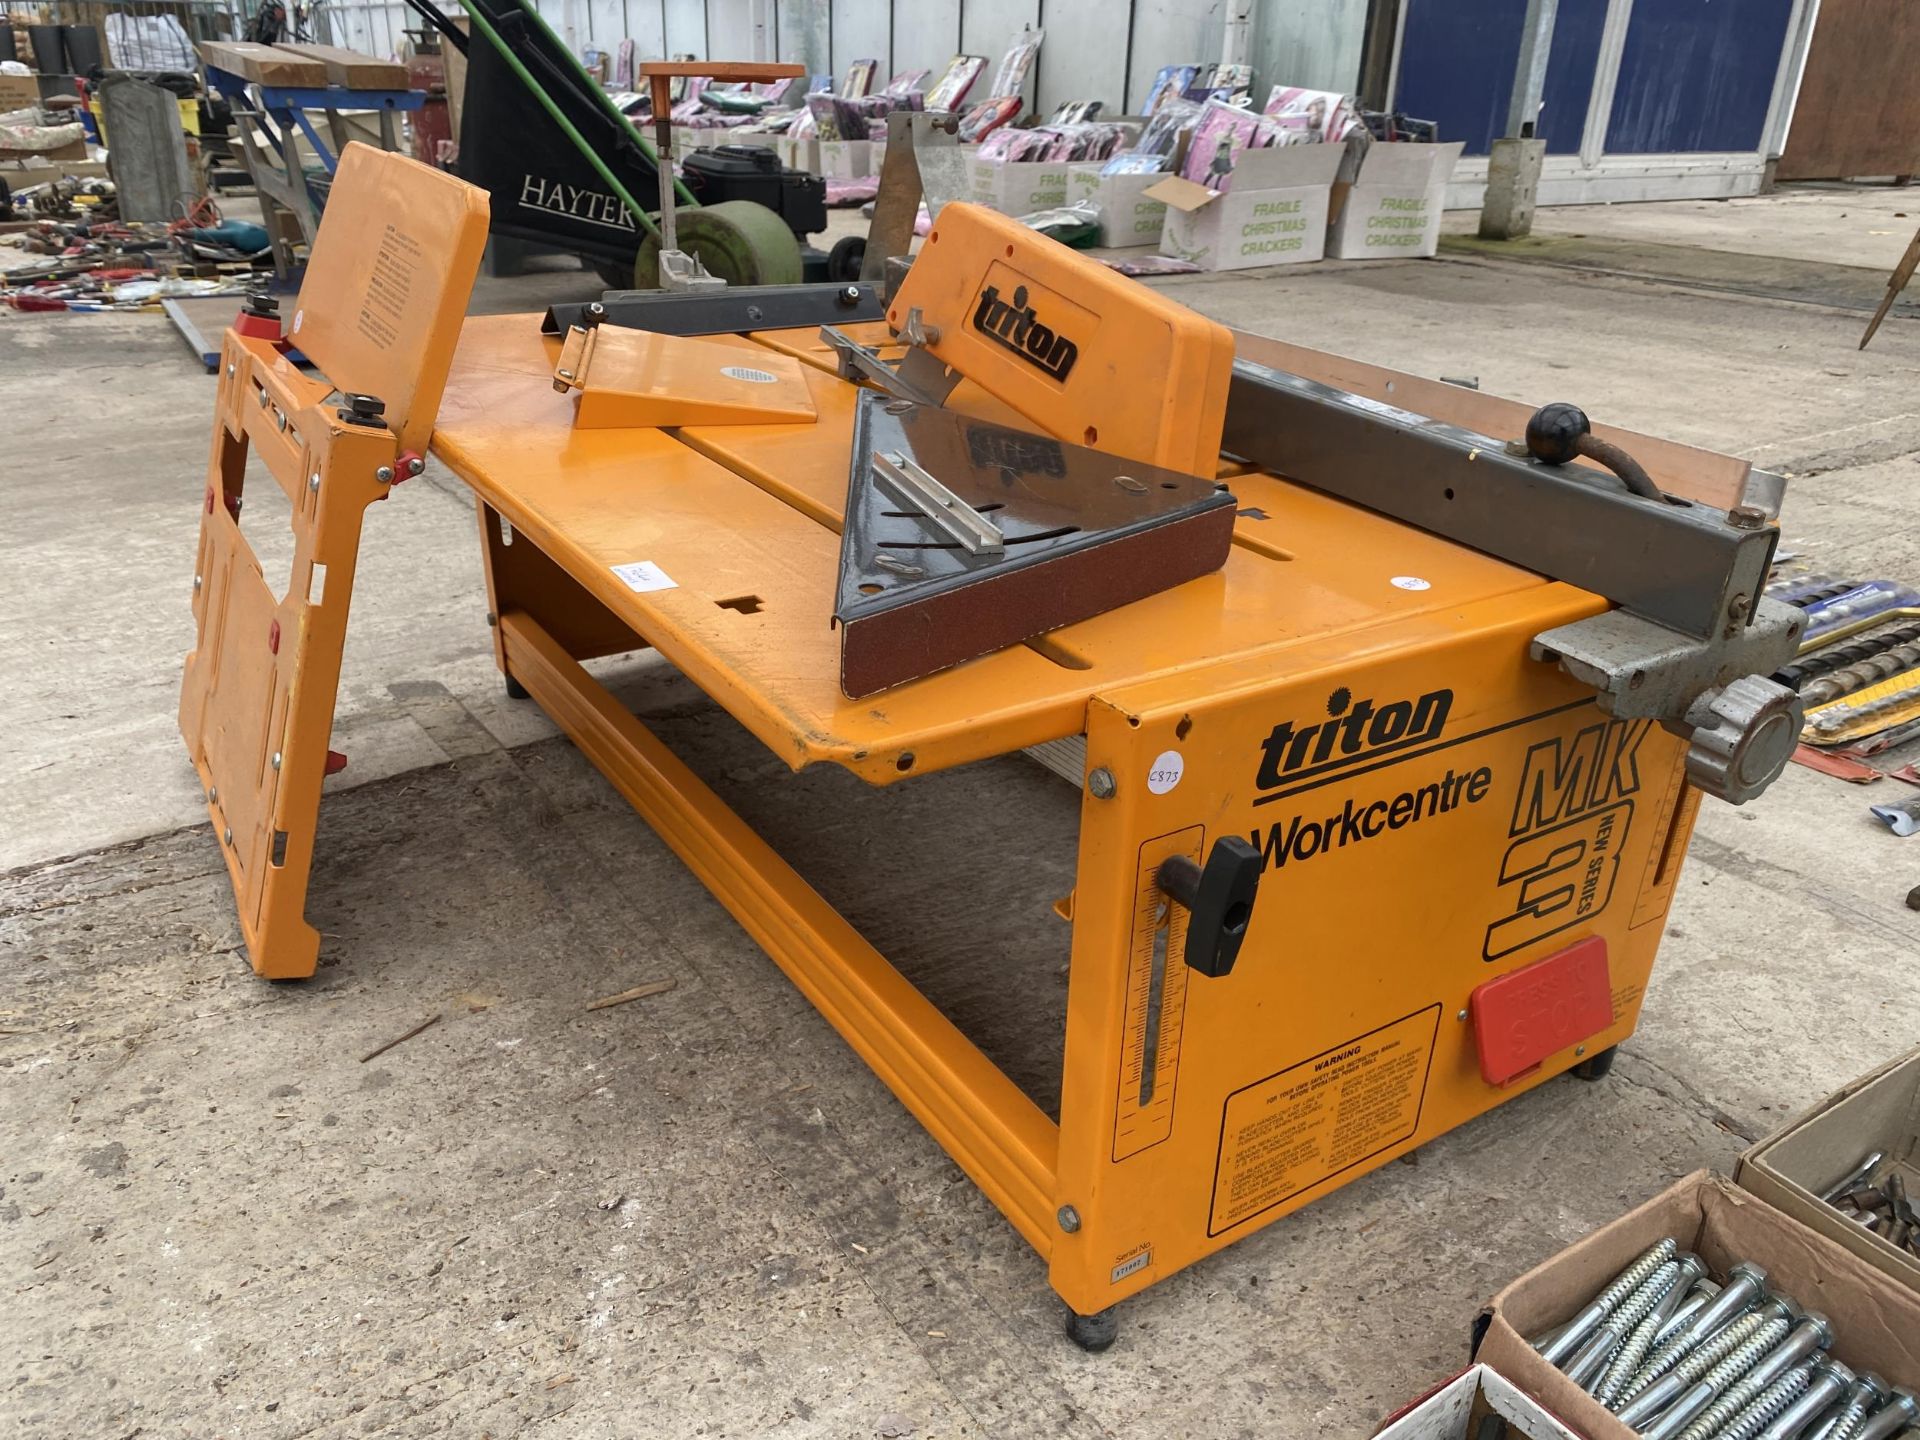 A TRITON WORKCENTRE TABLE SAW FRAME (NO ACTUAL SAW) - Image 2 of 3